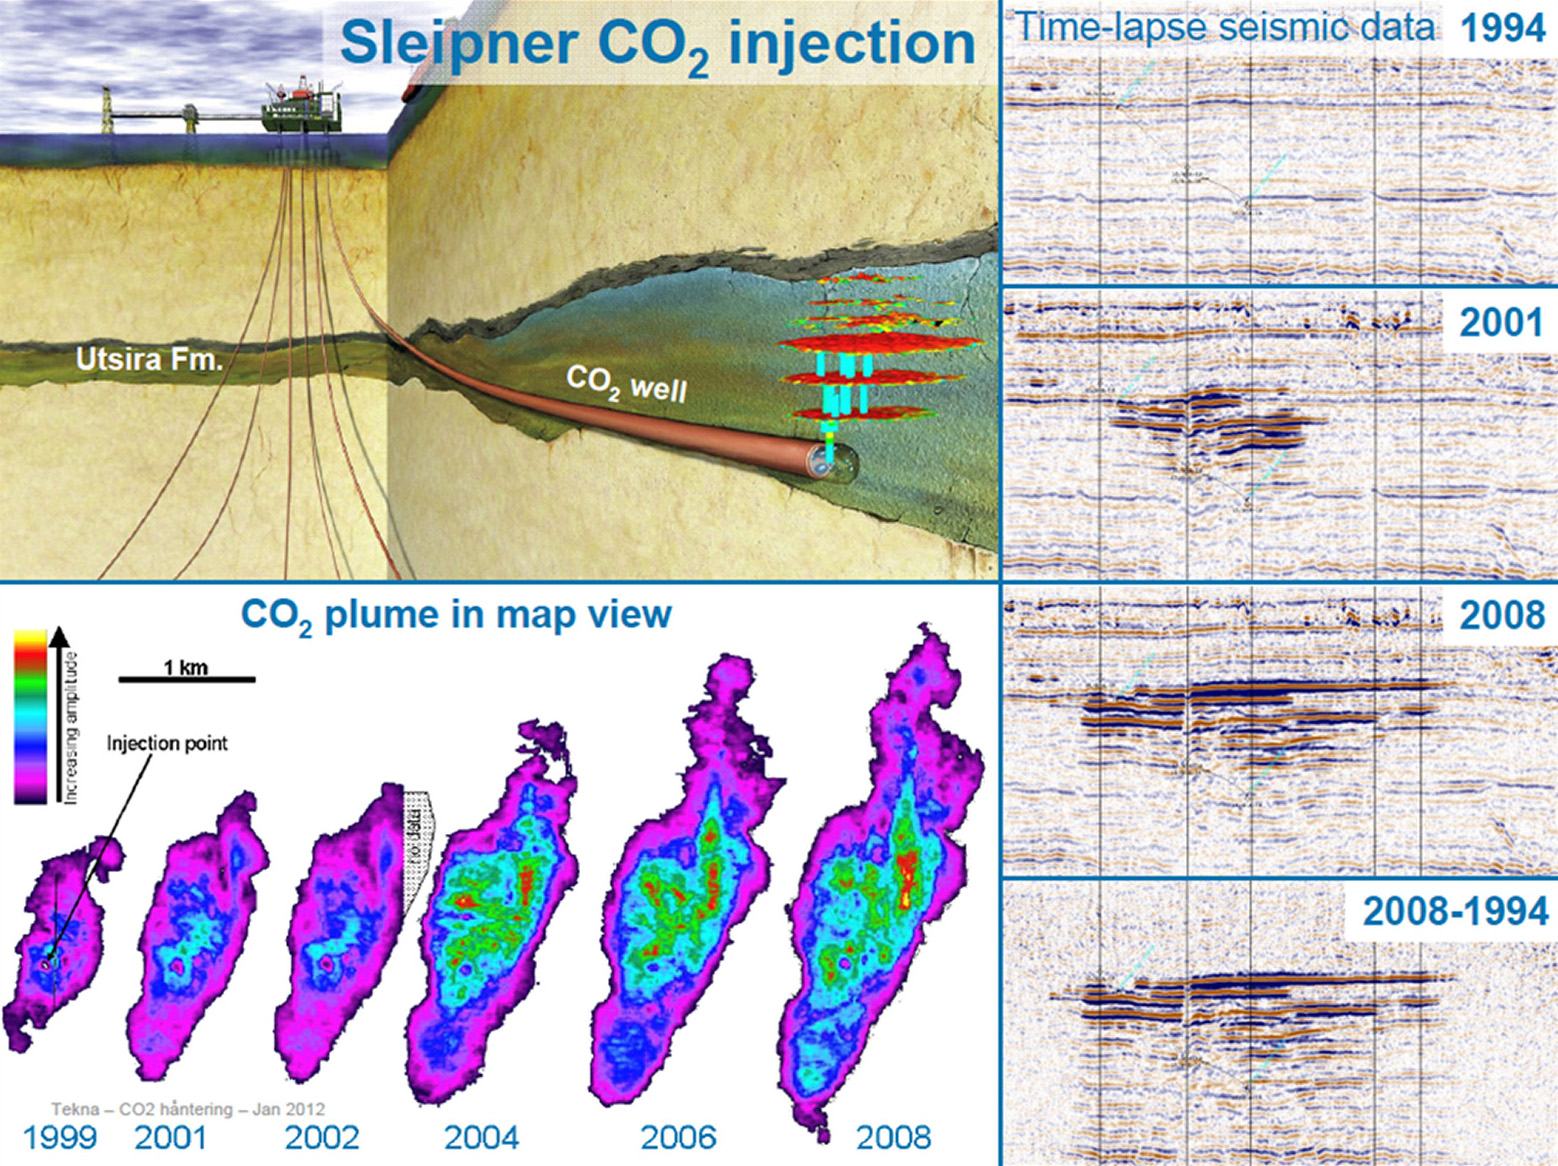 Collage of three figures from the Sleipner carbon dioxide injection project. The first figure is an illustration showing the project in a geologic cut away. The second and third figures are actual data measurements showing increasing concentrations of carbon dioxide in the reservoir over time.